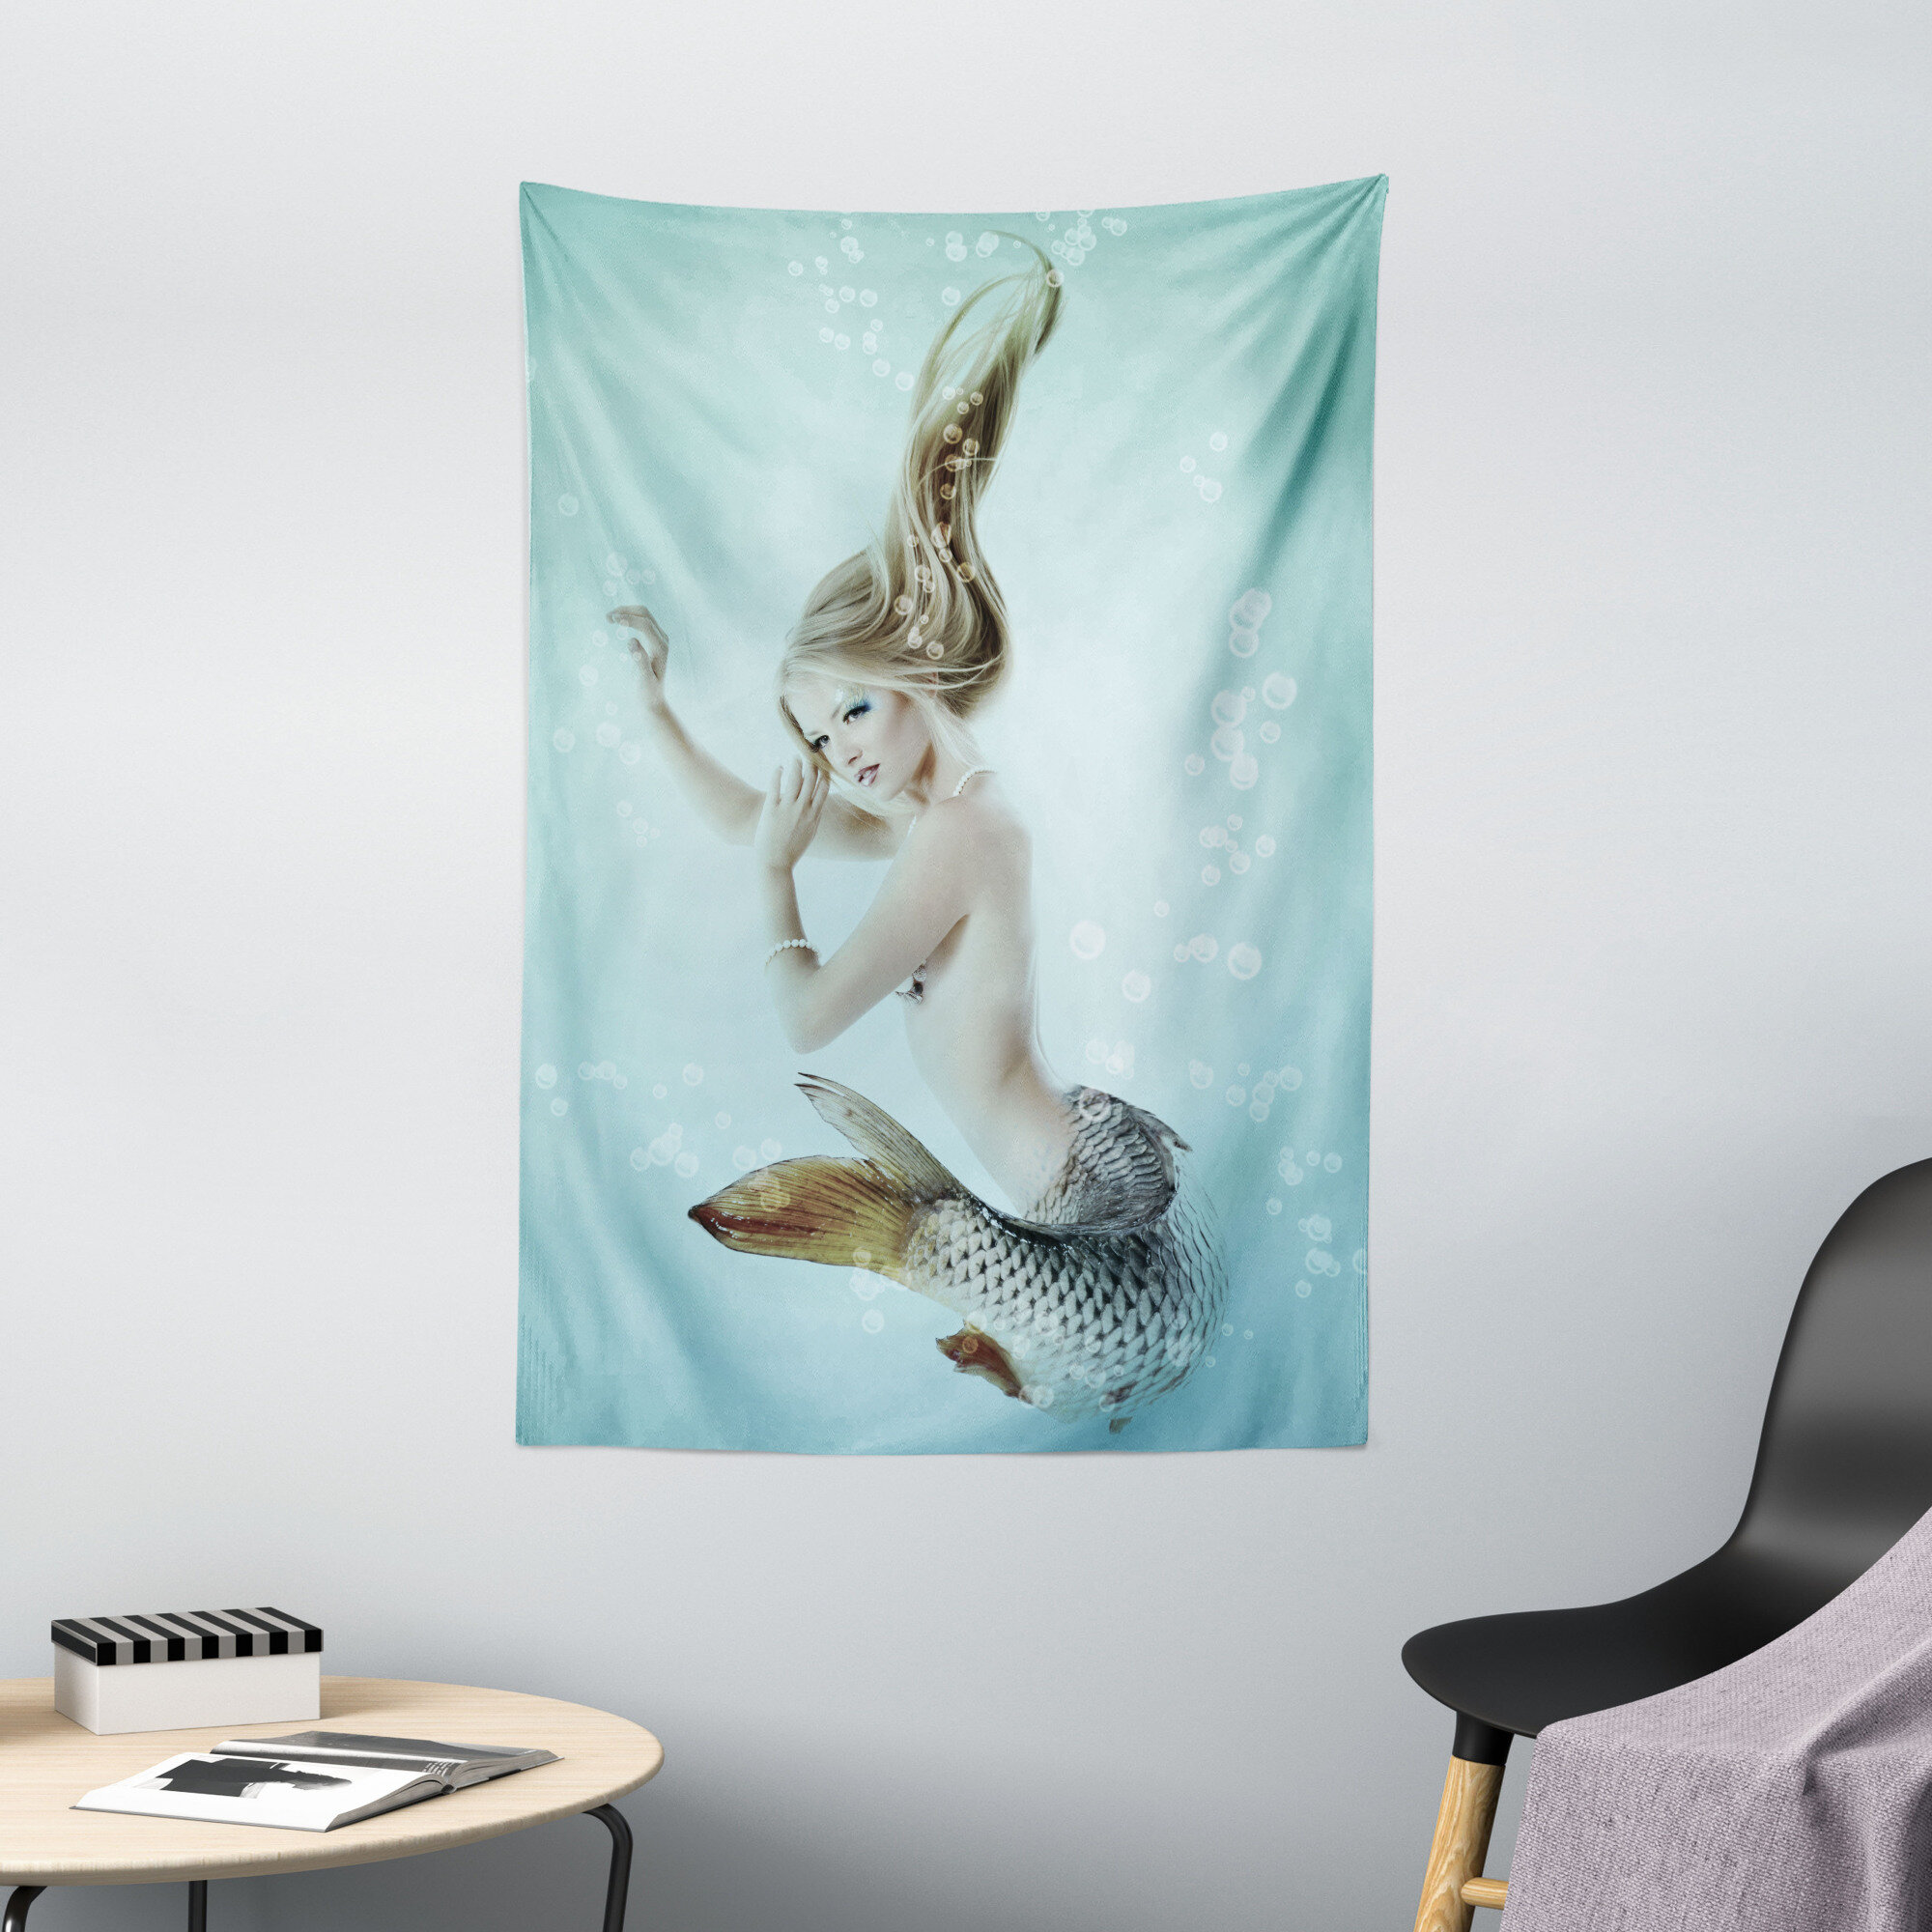 Bless international Ambesonne Mermaid Tapestry, Floating Girl Water Bubbles  Underwater Themed Art Print, Wall Hanging For Bedroom Living Room Dorm Decor  Wayfair Canada